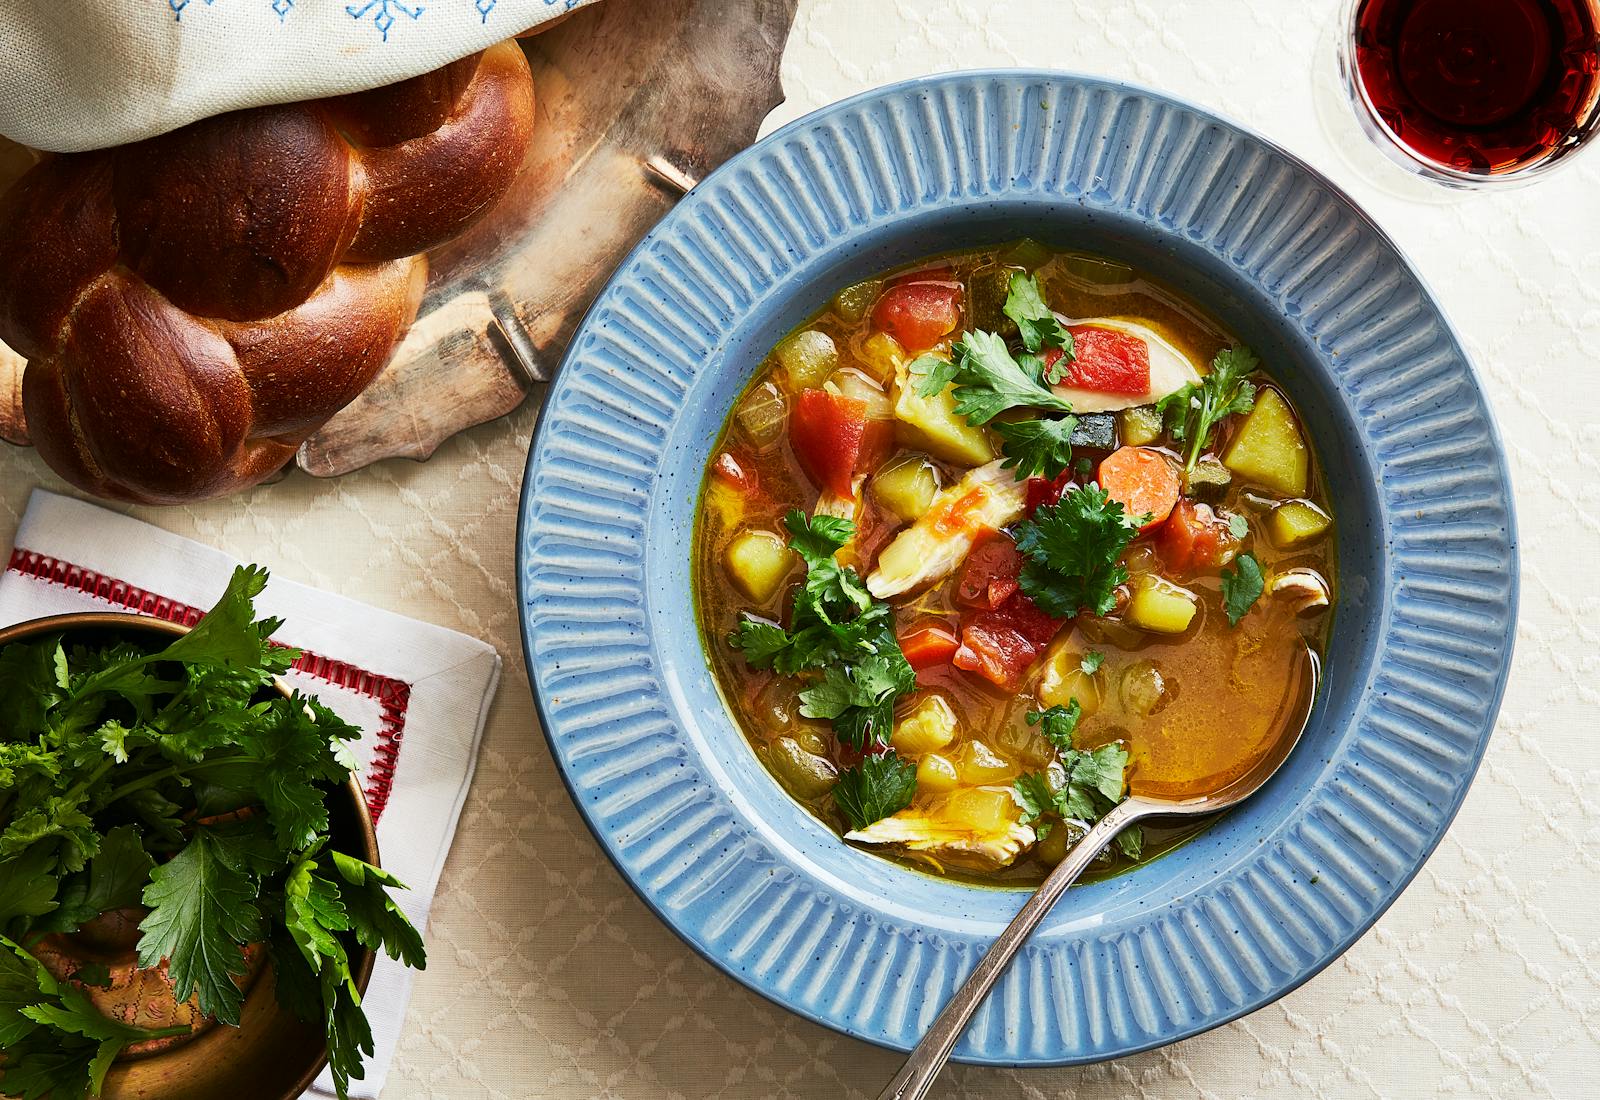 Yemenite soup with chicken and hawaij garnished with parsley alongside red wine and braised challah.